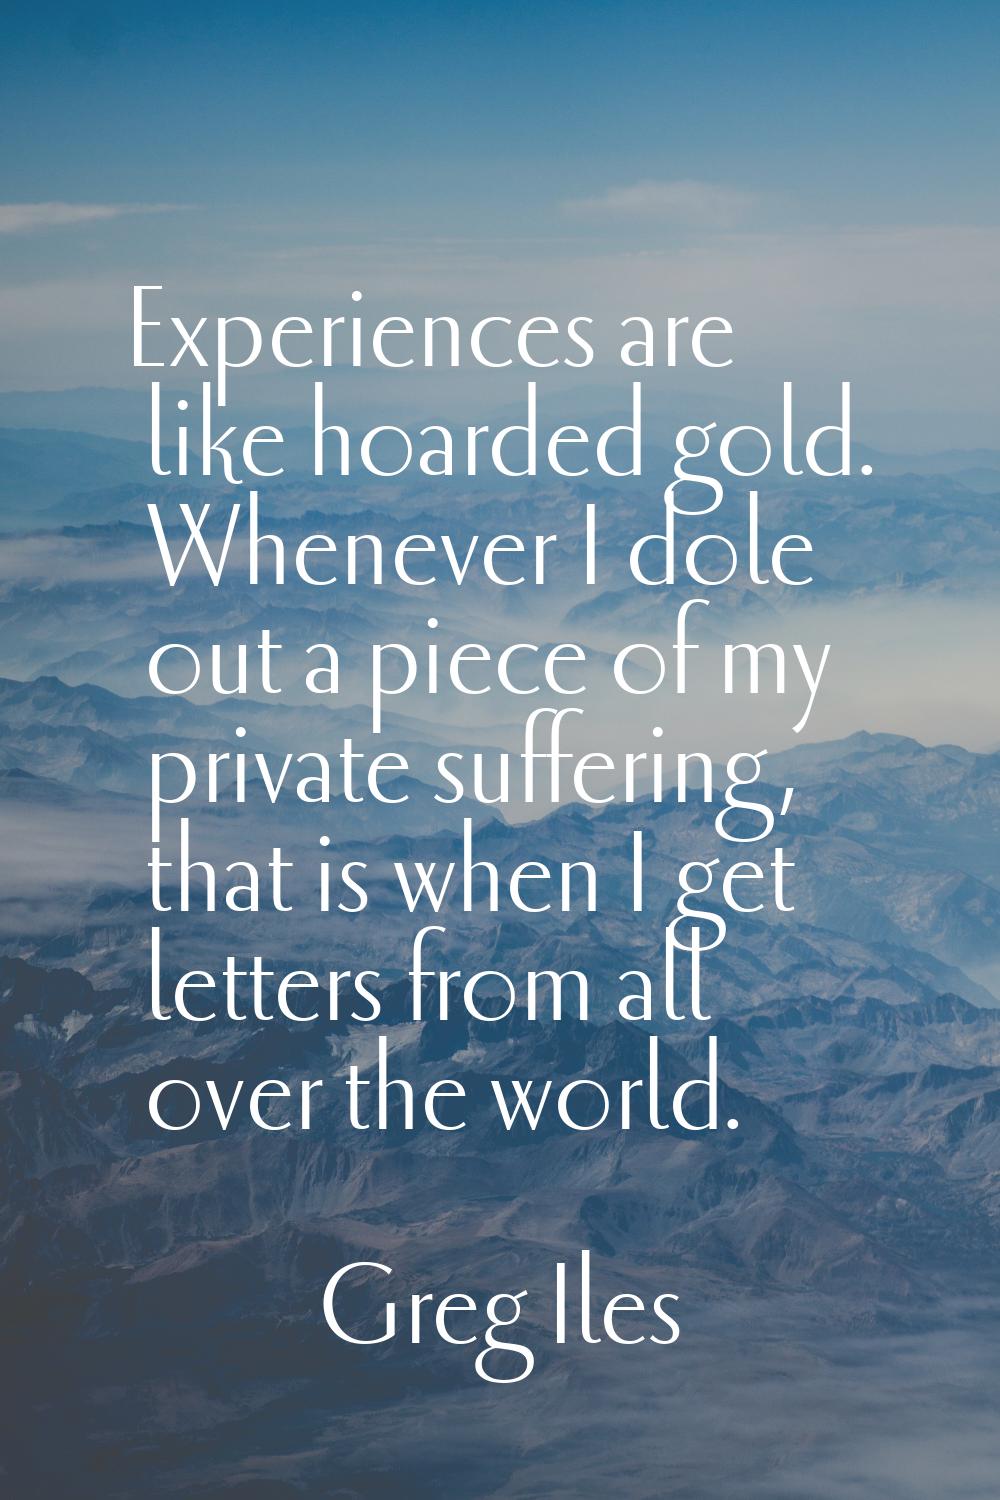 Experiences are like hoarded gold. Whenever I dole out a piece of my private suffering, that is whe